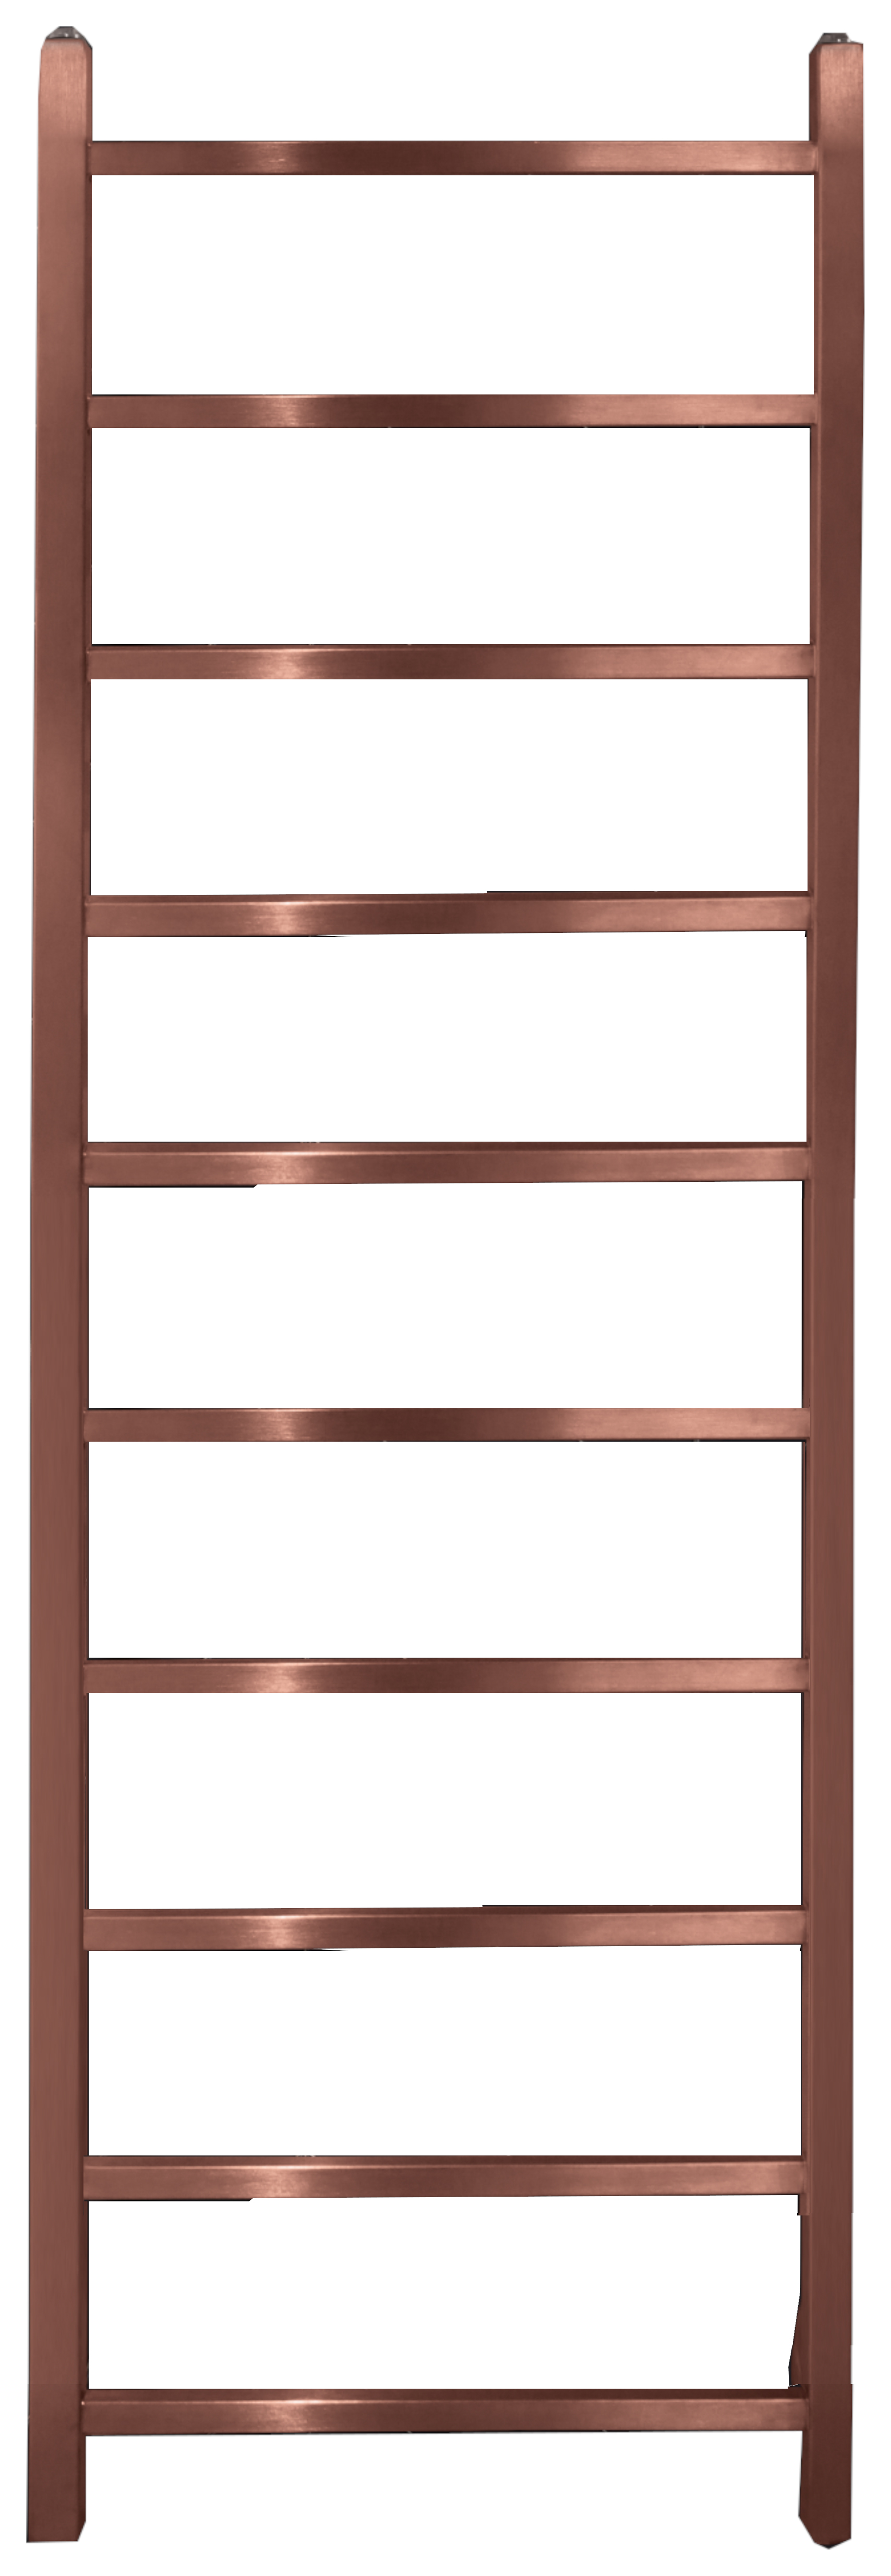 Towelrads Diva Rose Gold Dry Electric Non Thermostatic Towel Radiator - 1500 x 500mm